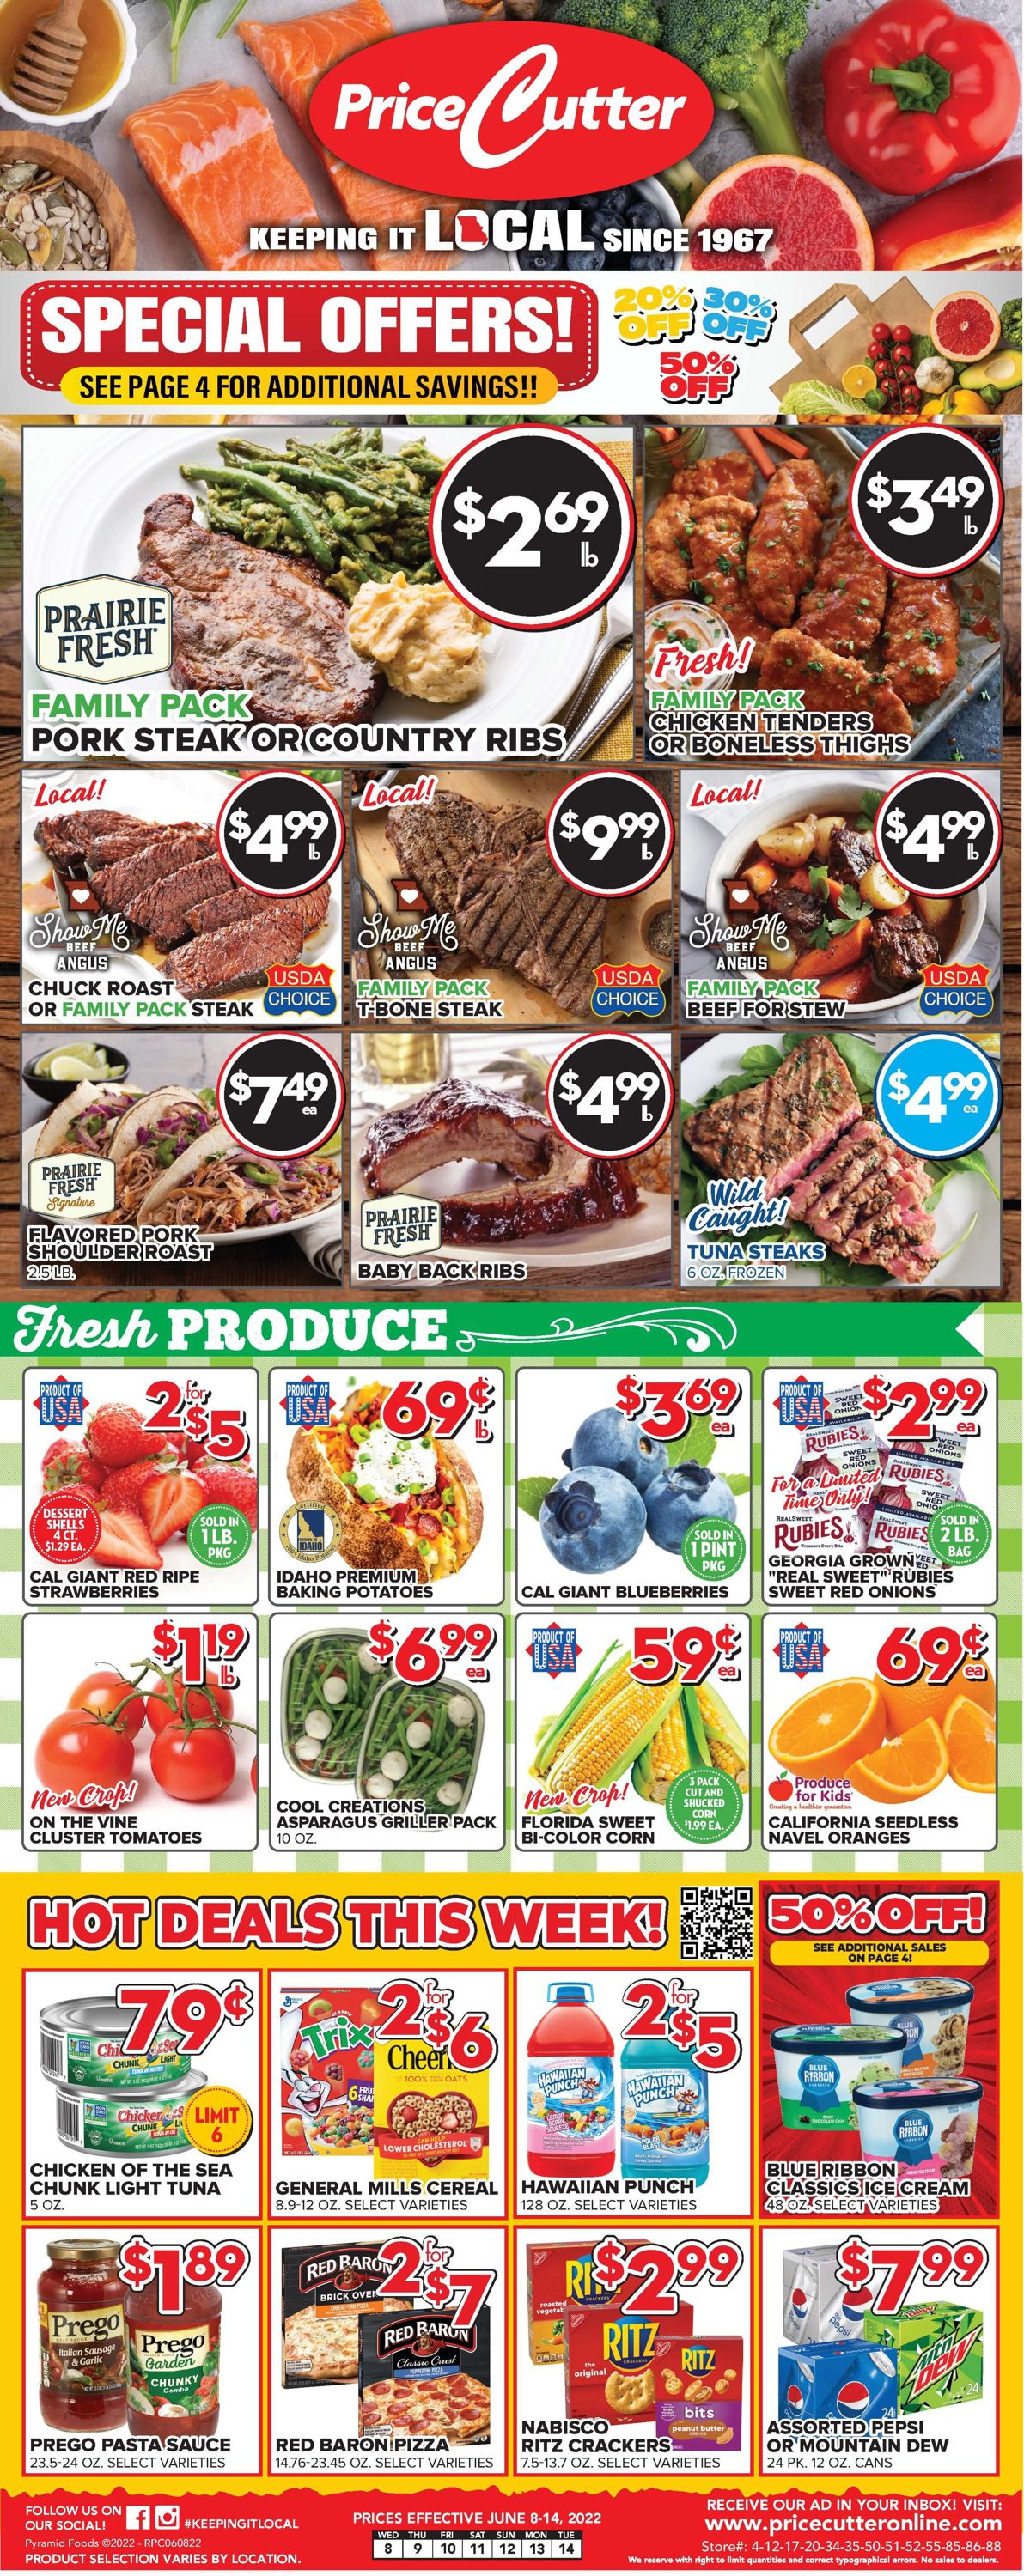 Price Cutter Weekly Ad Circular - valid 06/08-06/14/2022